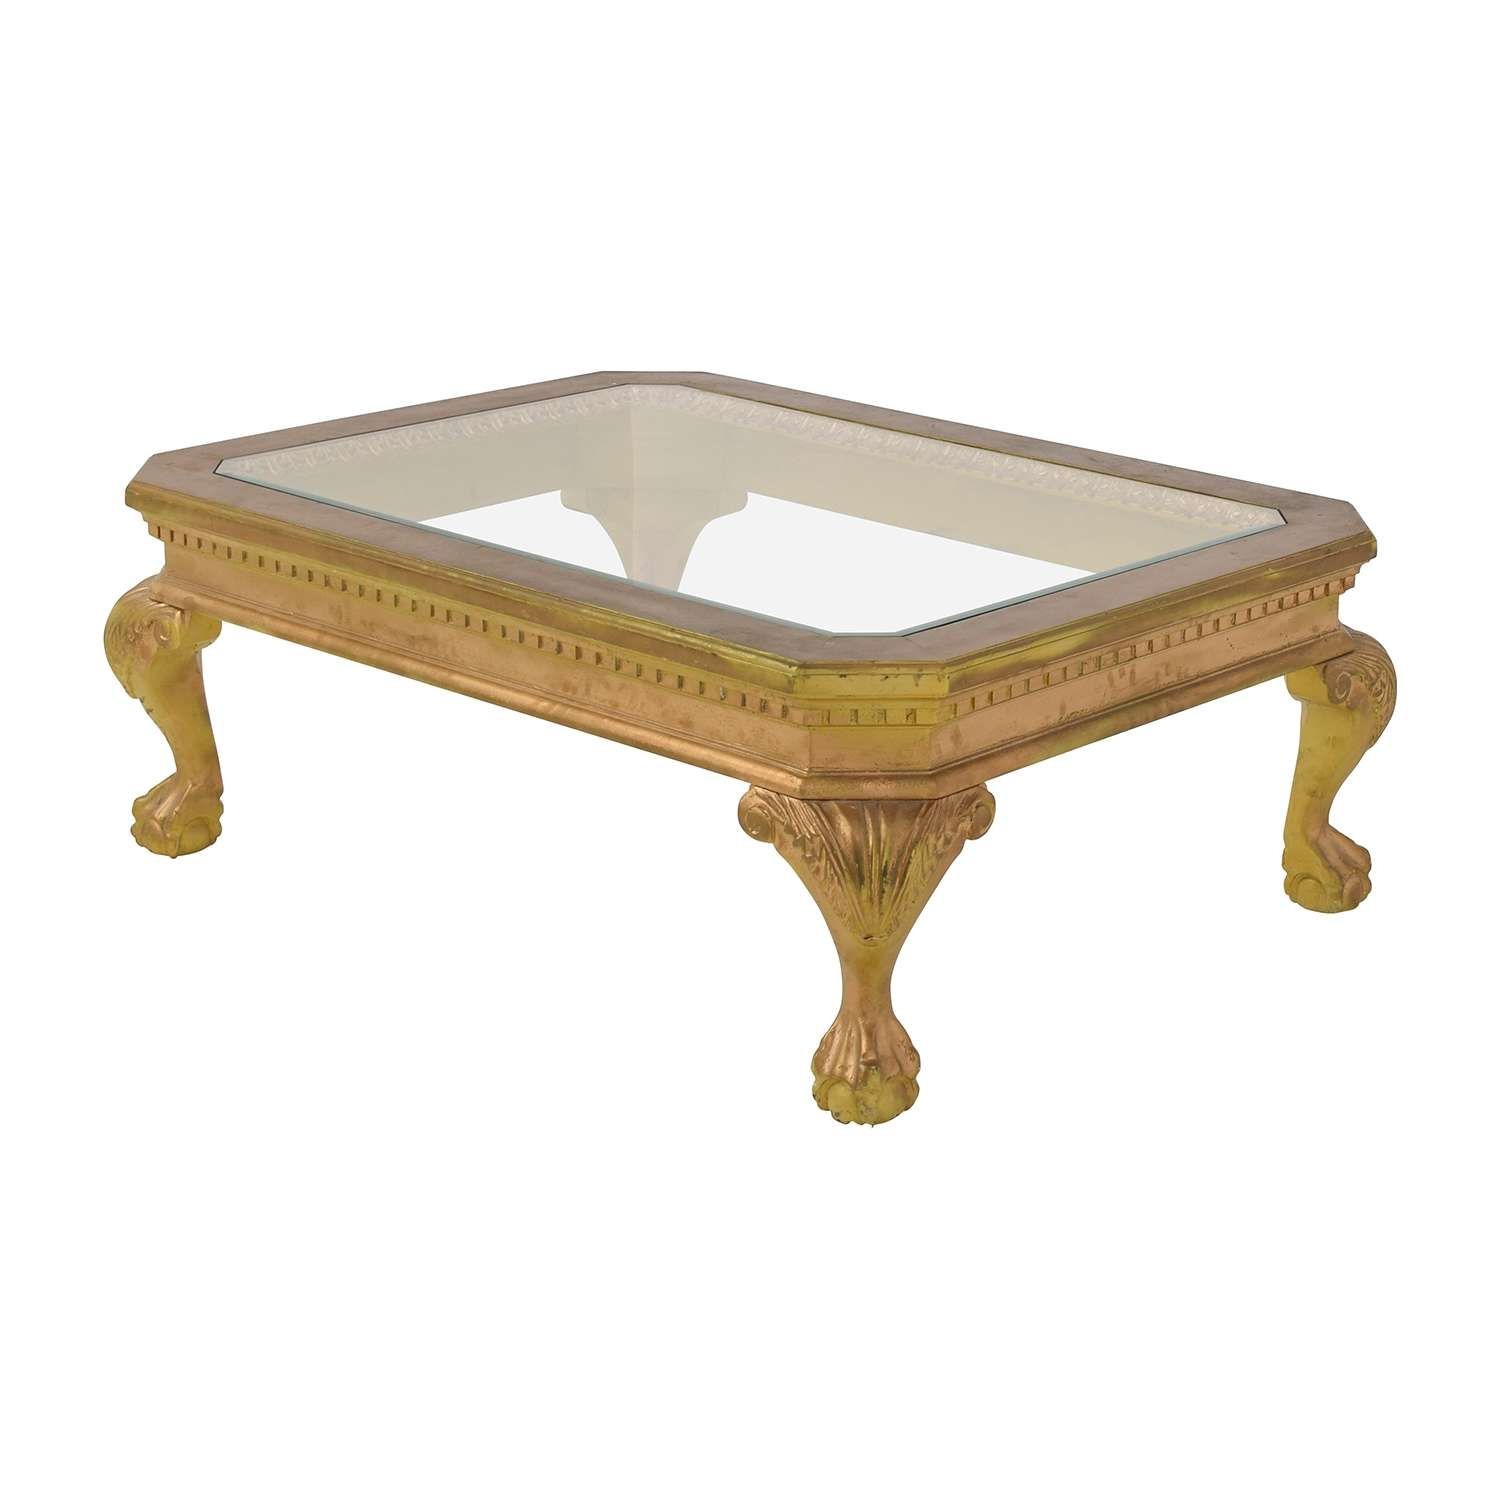 [%newest Antique Glass Coffee Tables Within 75% Off – Distressed Wood Antique Gold And Glass Coffee Table / Tables|75% Off – Distressed Wood Antique Gold And Glass Coffee Table / Tables In Current Antique Glass Coffee Tables%] (Gallery 14 of 20)